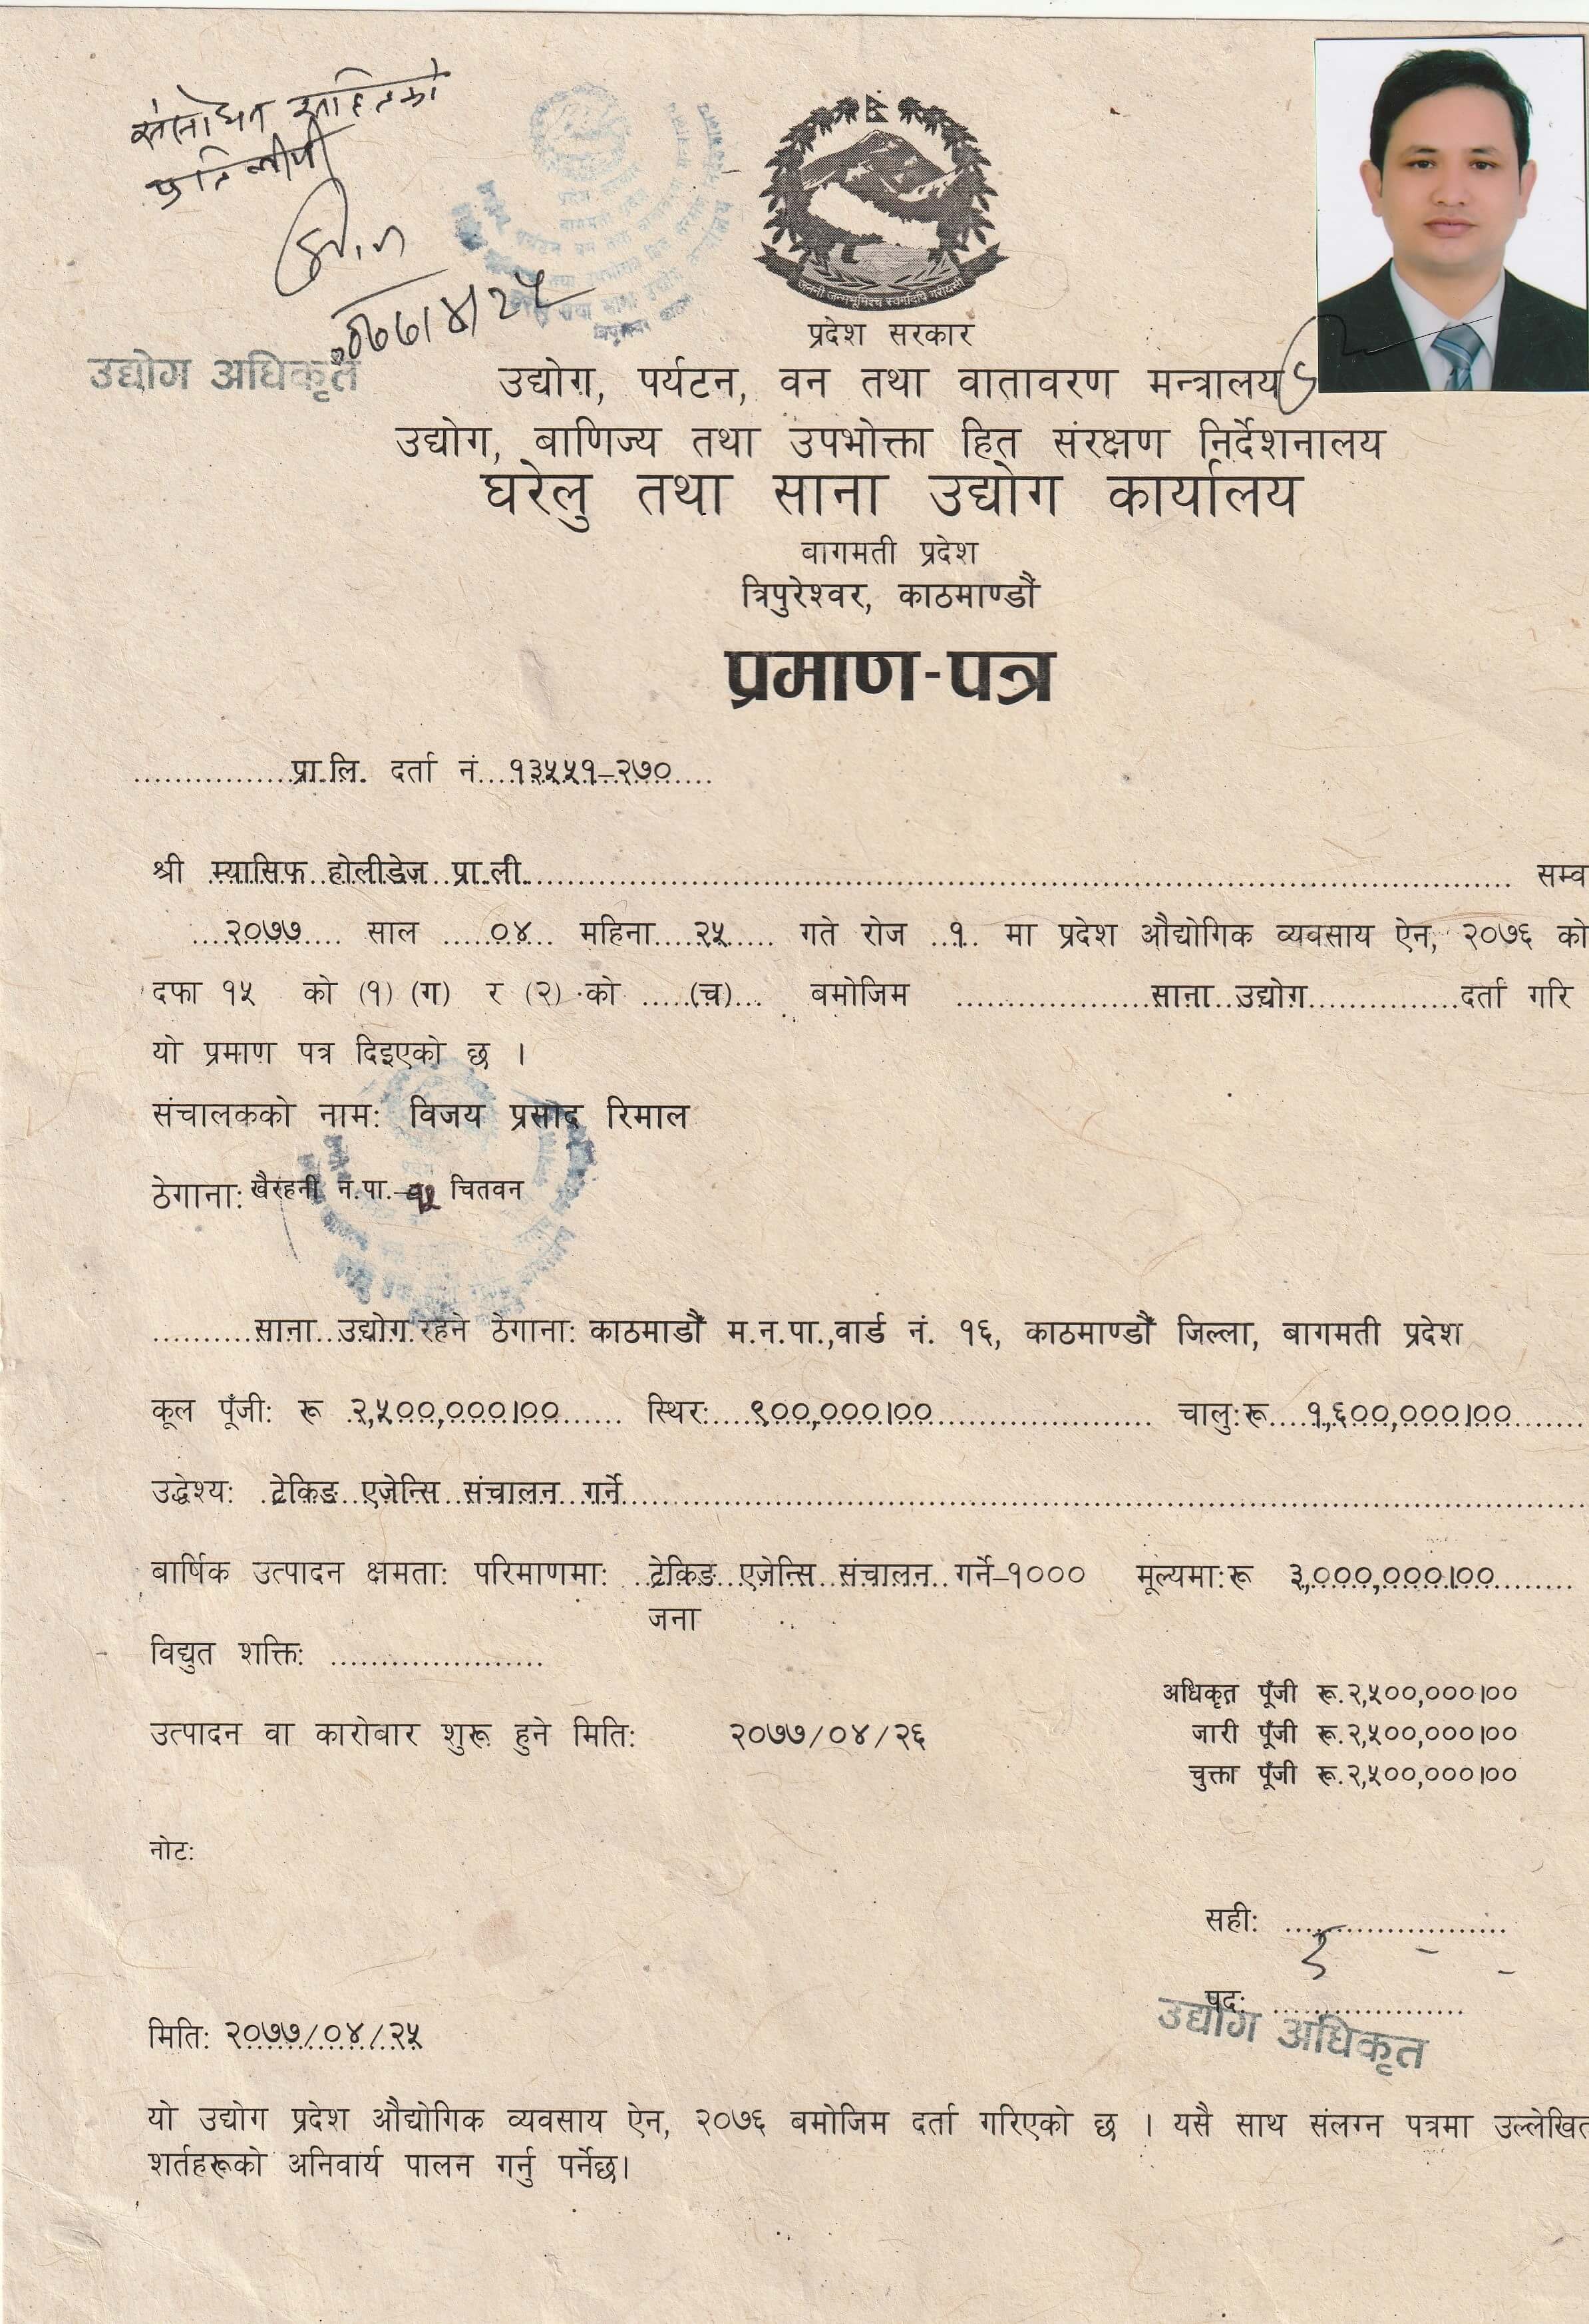 Cottage and Small Scale Industries License